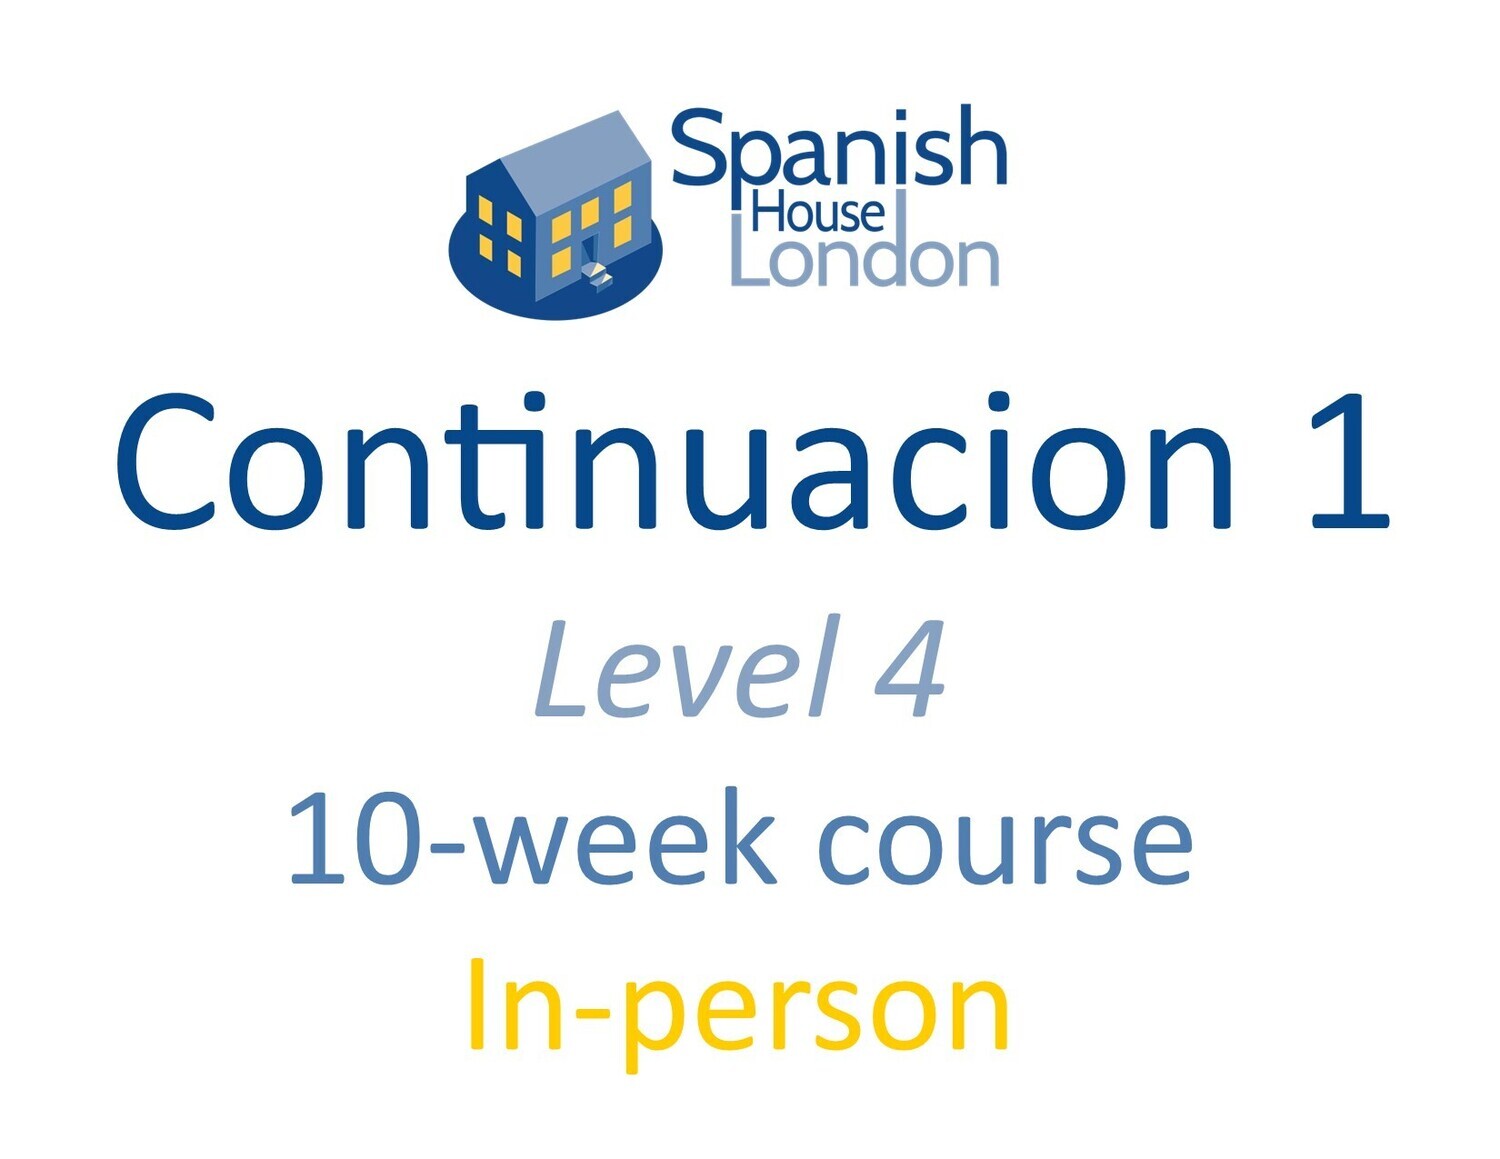 Continuacion 1 Course starting on 24th November at 9am in Clapham North